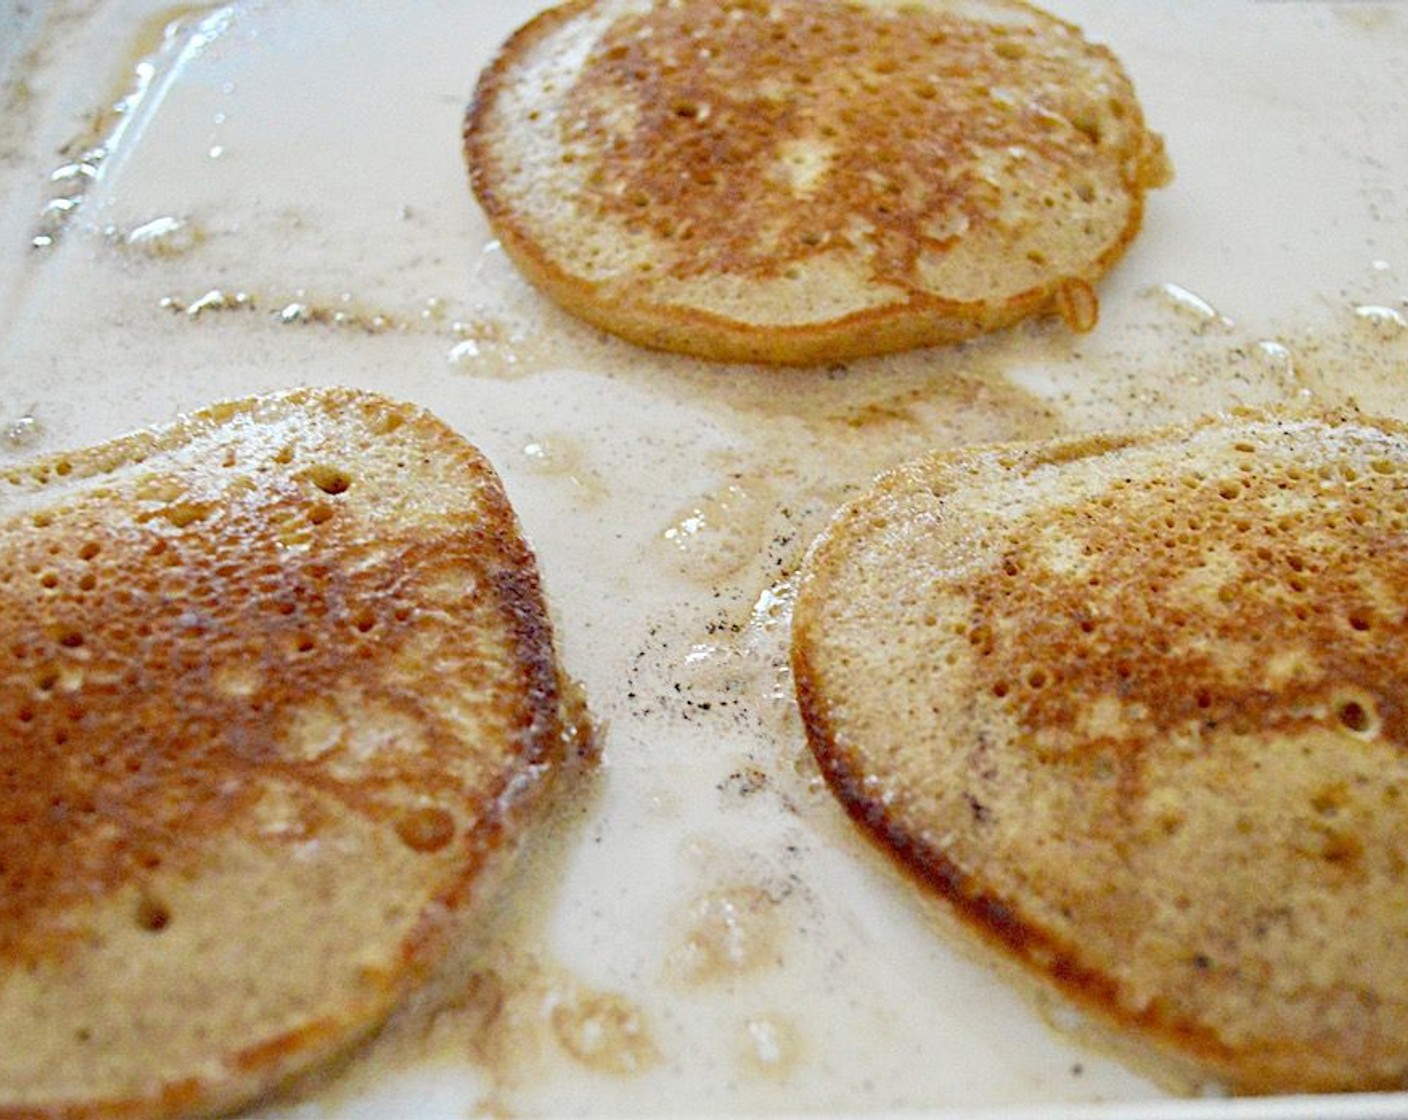 step 9 Grease the griddle with a pat of Butter (to taste) and then scoop the desired amount of batter on to make the size pancakes you want. On my griddle I easily fit 6 decent sized pancakes at a time. Cook them for about 3-4 minutes on each side, until fluffy and golden.